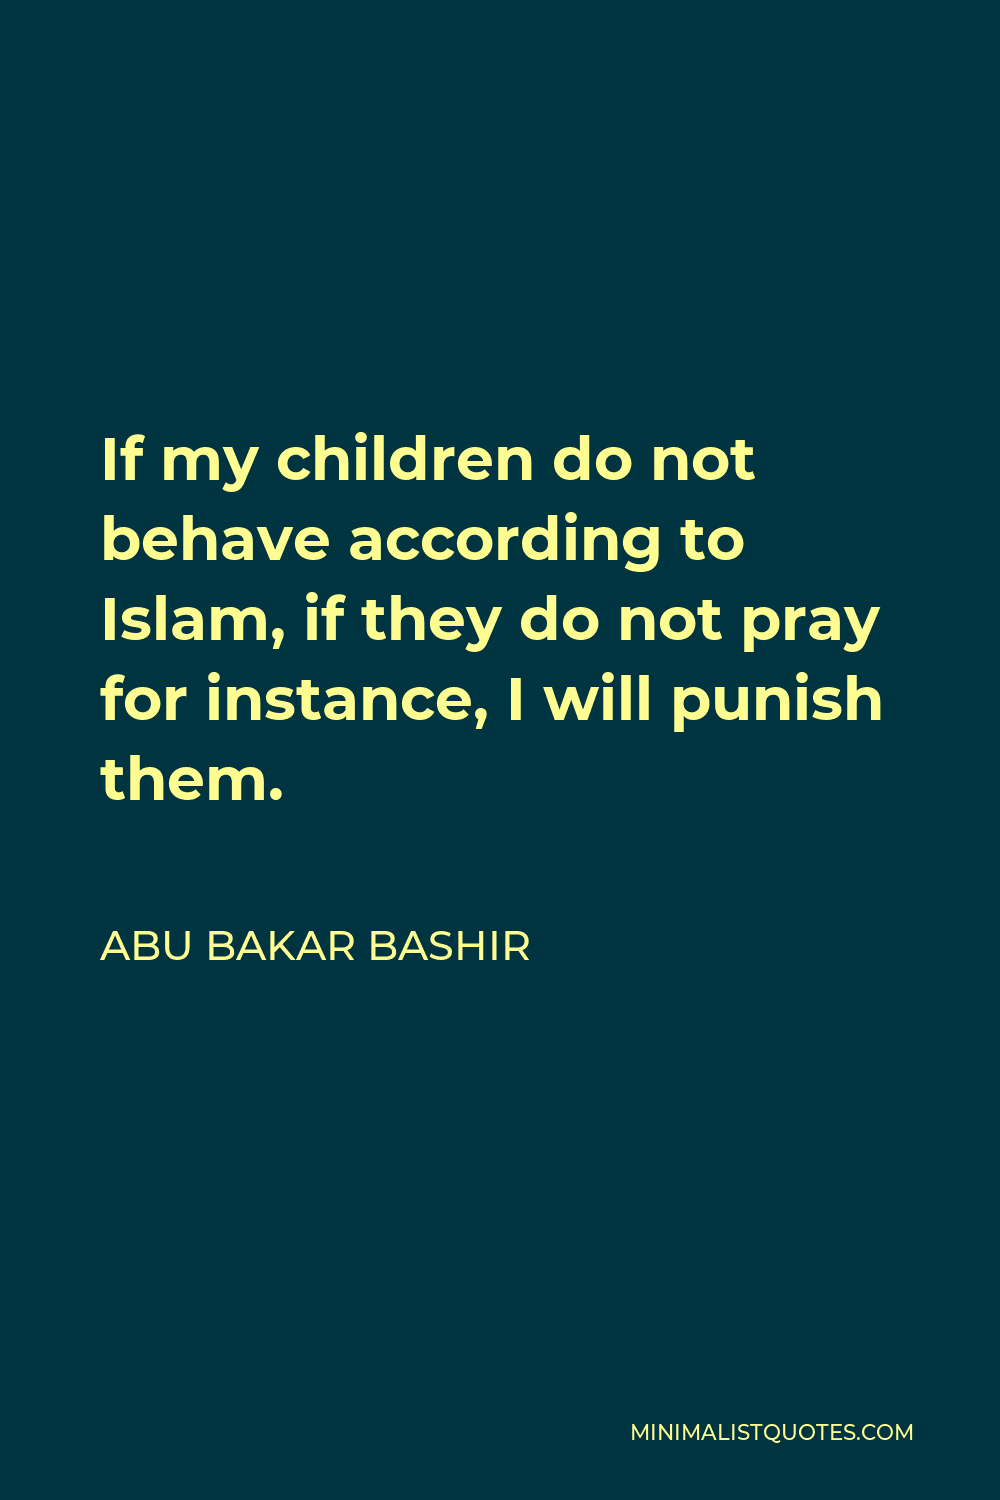 Abu Bakar Bashir Quote - If my children do not behave according to Islam, if they do not pray for instance, I will punish them.